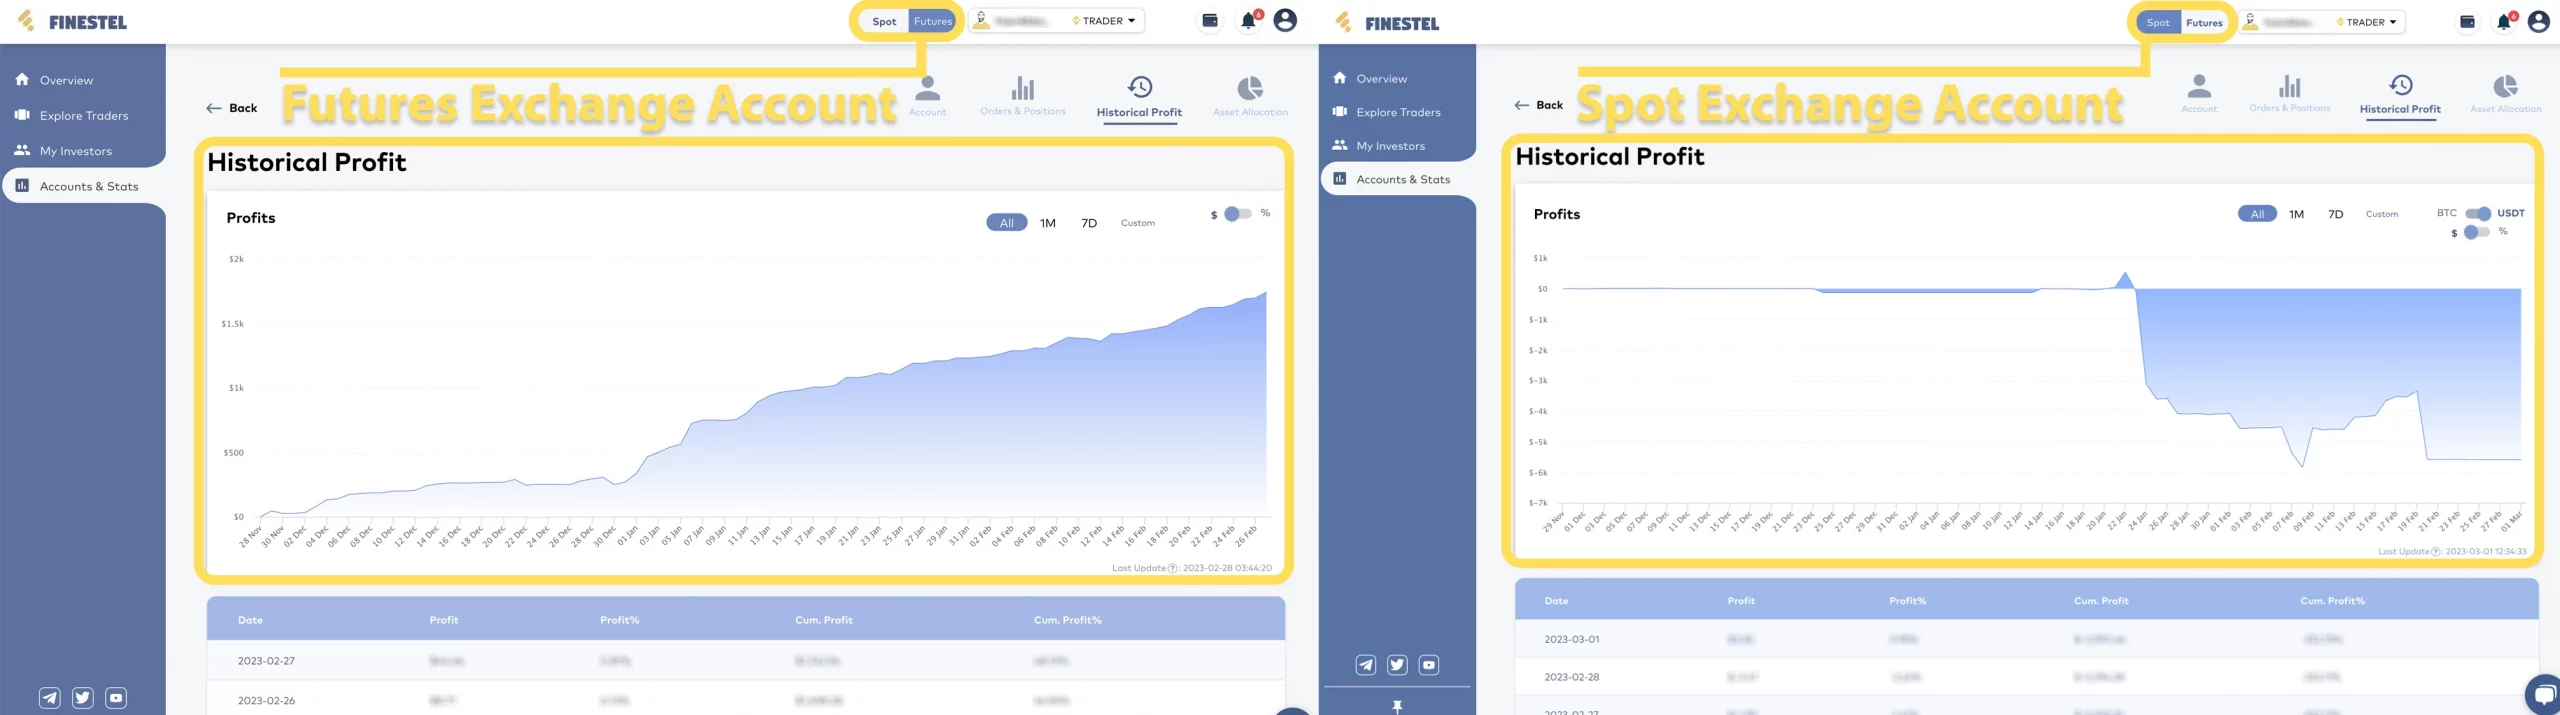 Performance history (P&L) for both connected spot & futures exchange accounts (binance)